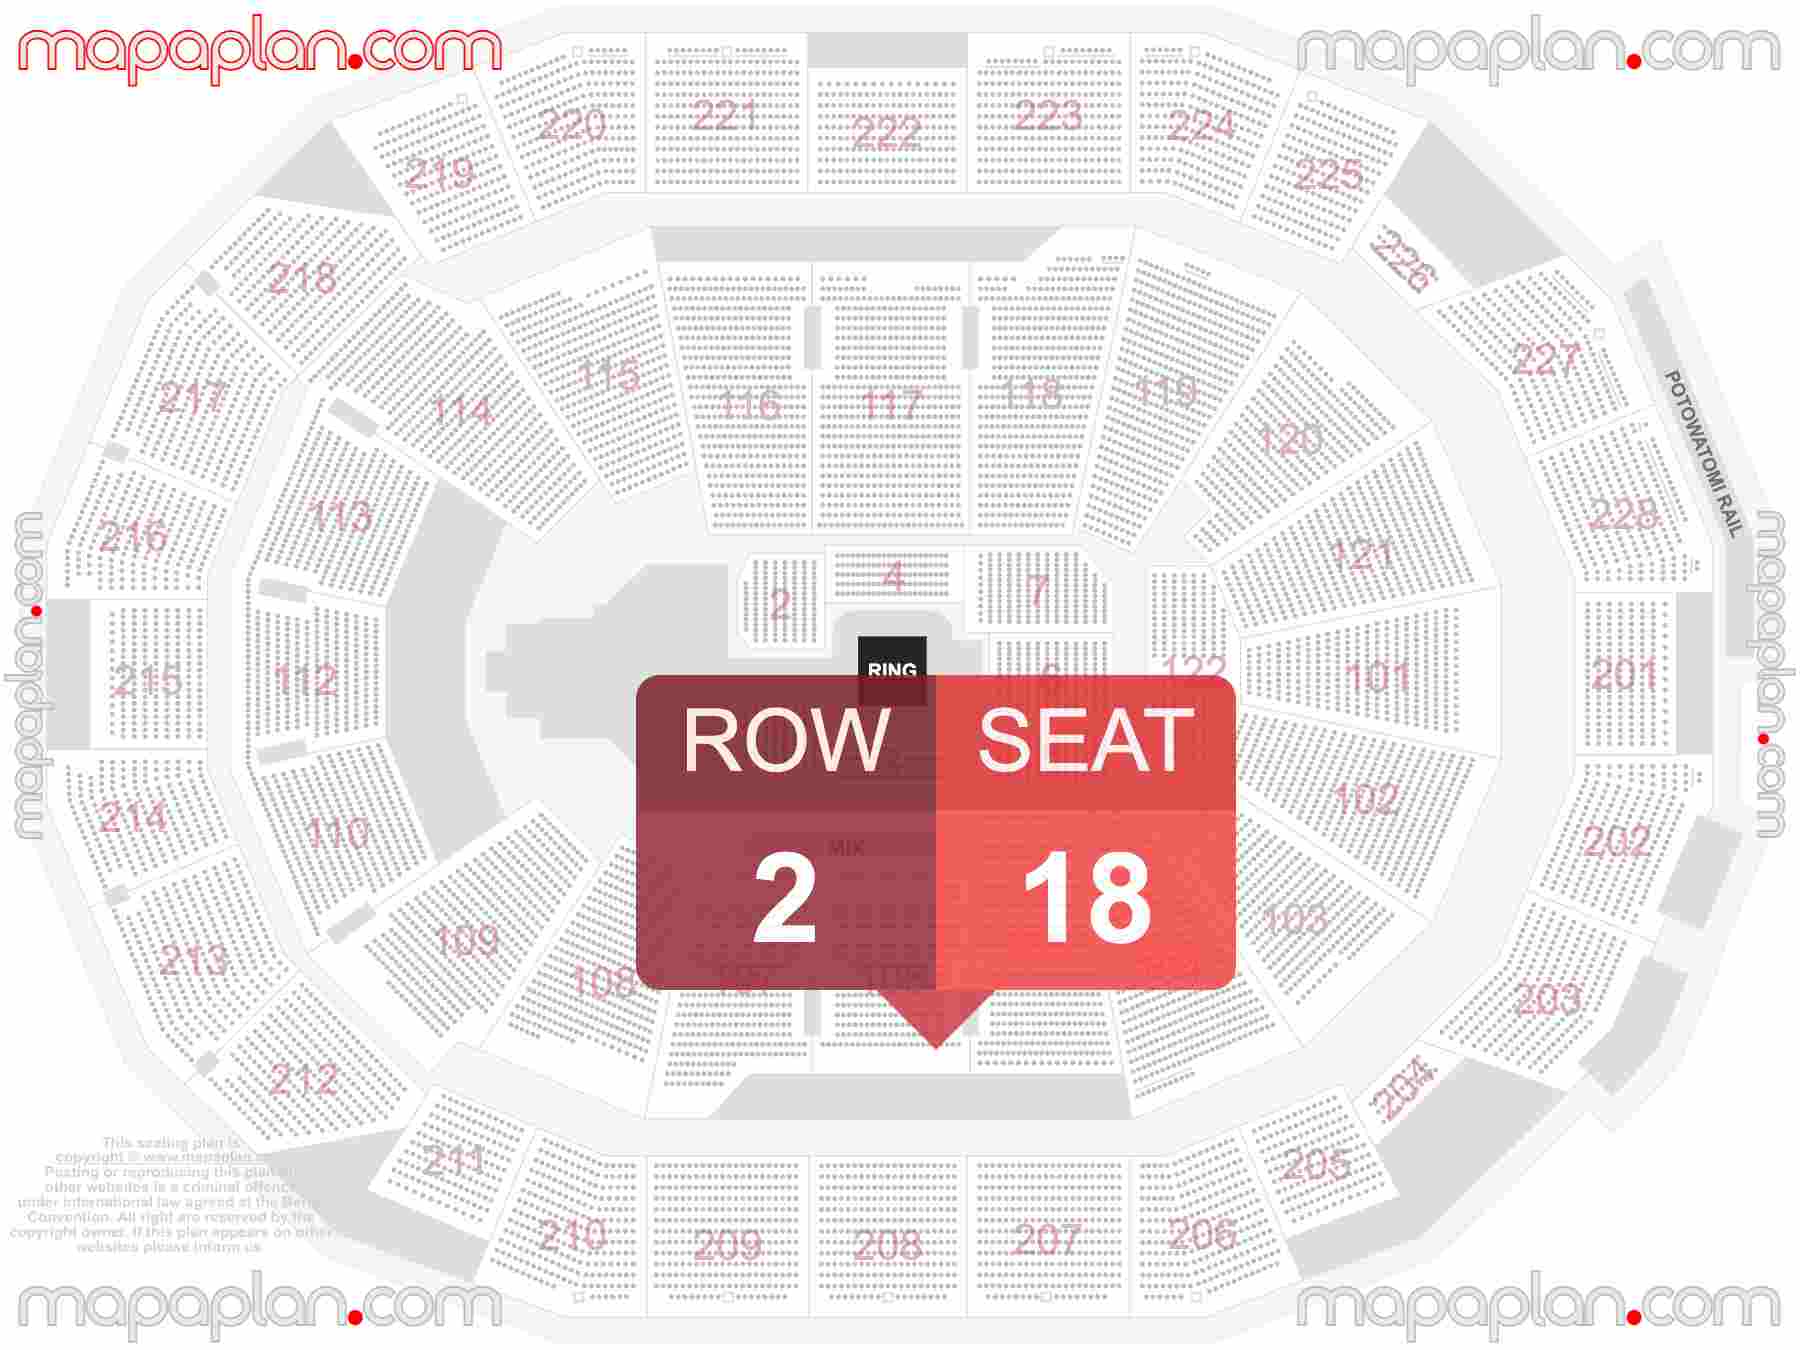 Milwaukee Fiserv Forum seating chart WWE wrestling & boxing find best seats row numbering system plan showing how many seats per row - Individual 'find my seat' virtual locator